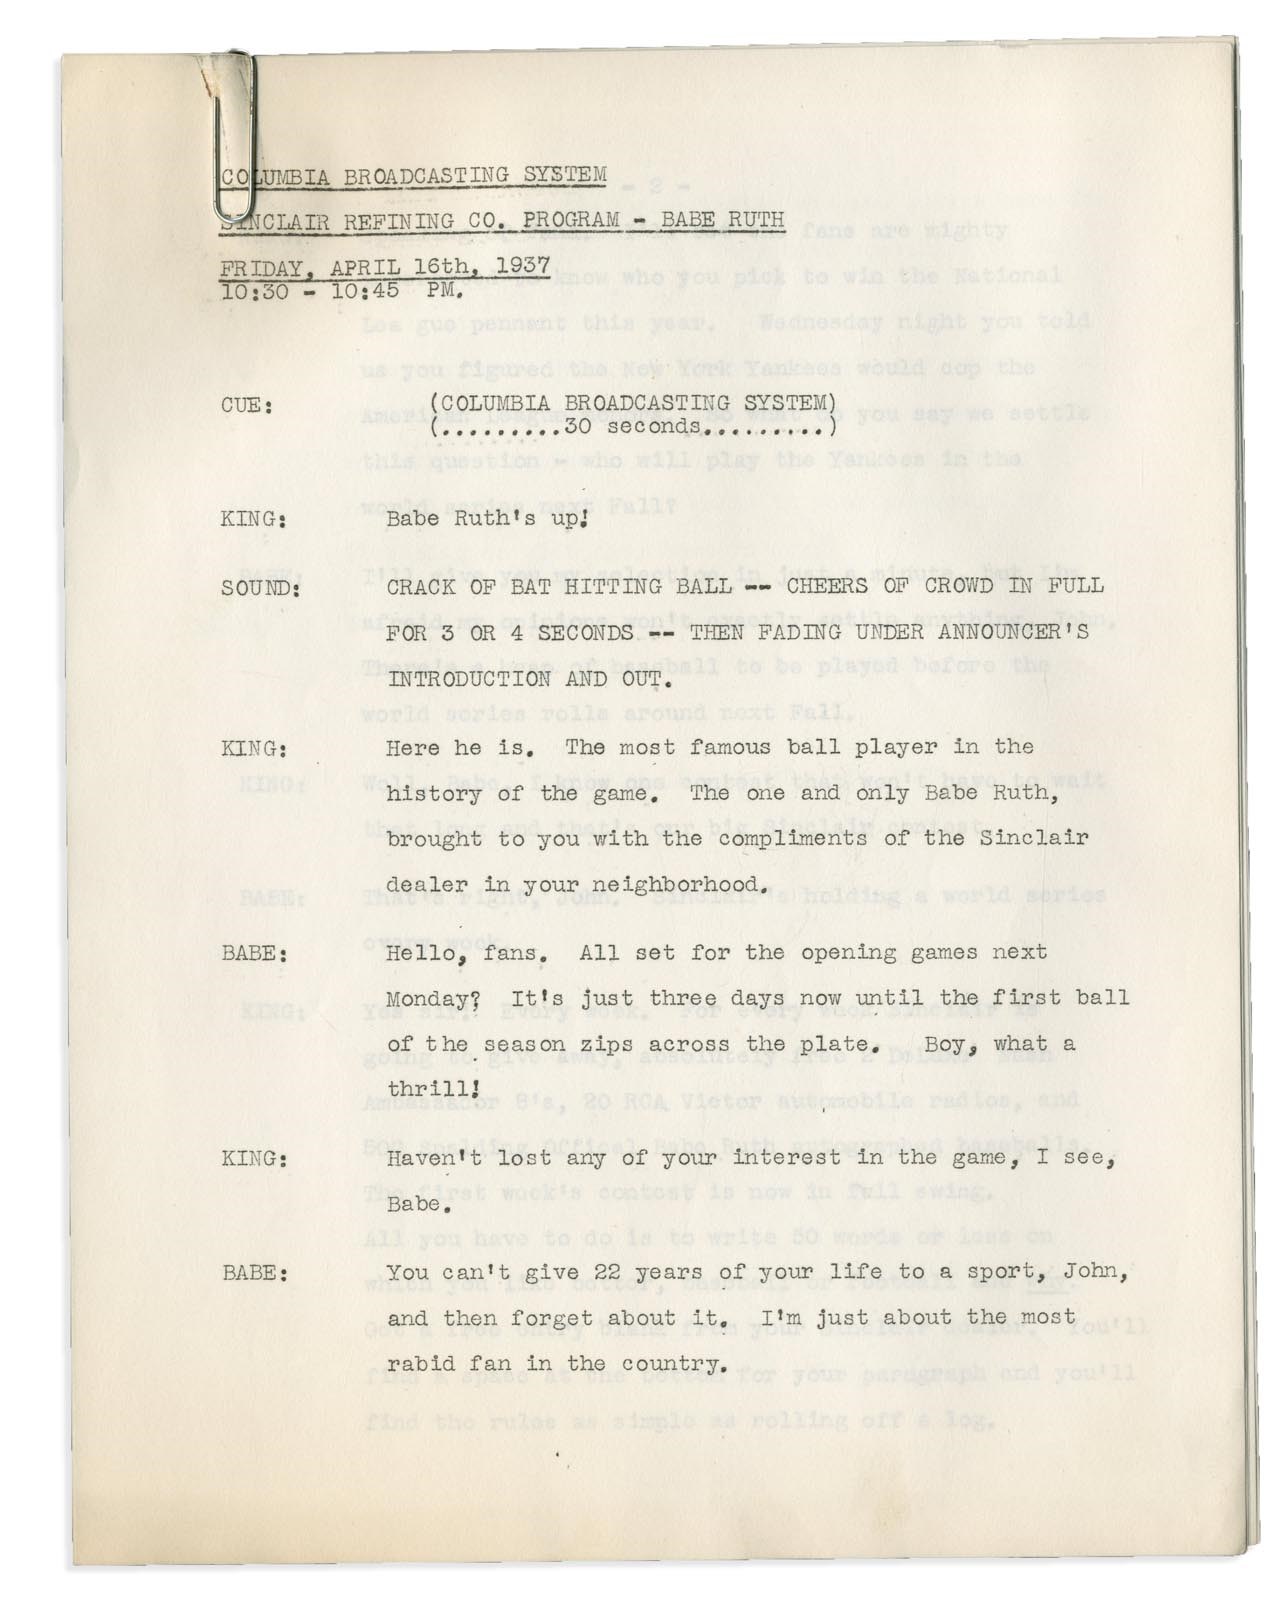 Collection Of Babe Ruth's Right Hand Man - 1937 Babe Ruth's Personal Sinclair Oil Radio Scripts